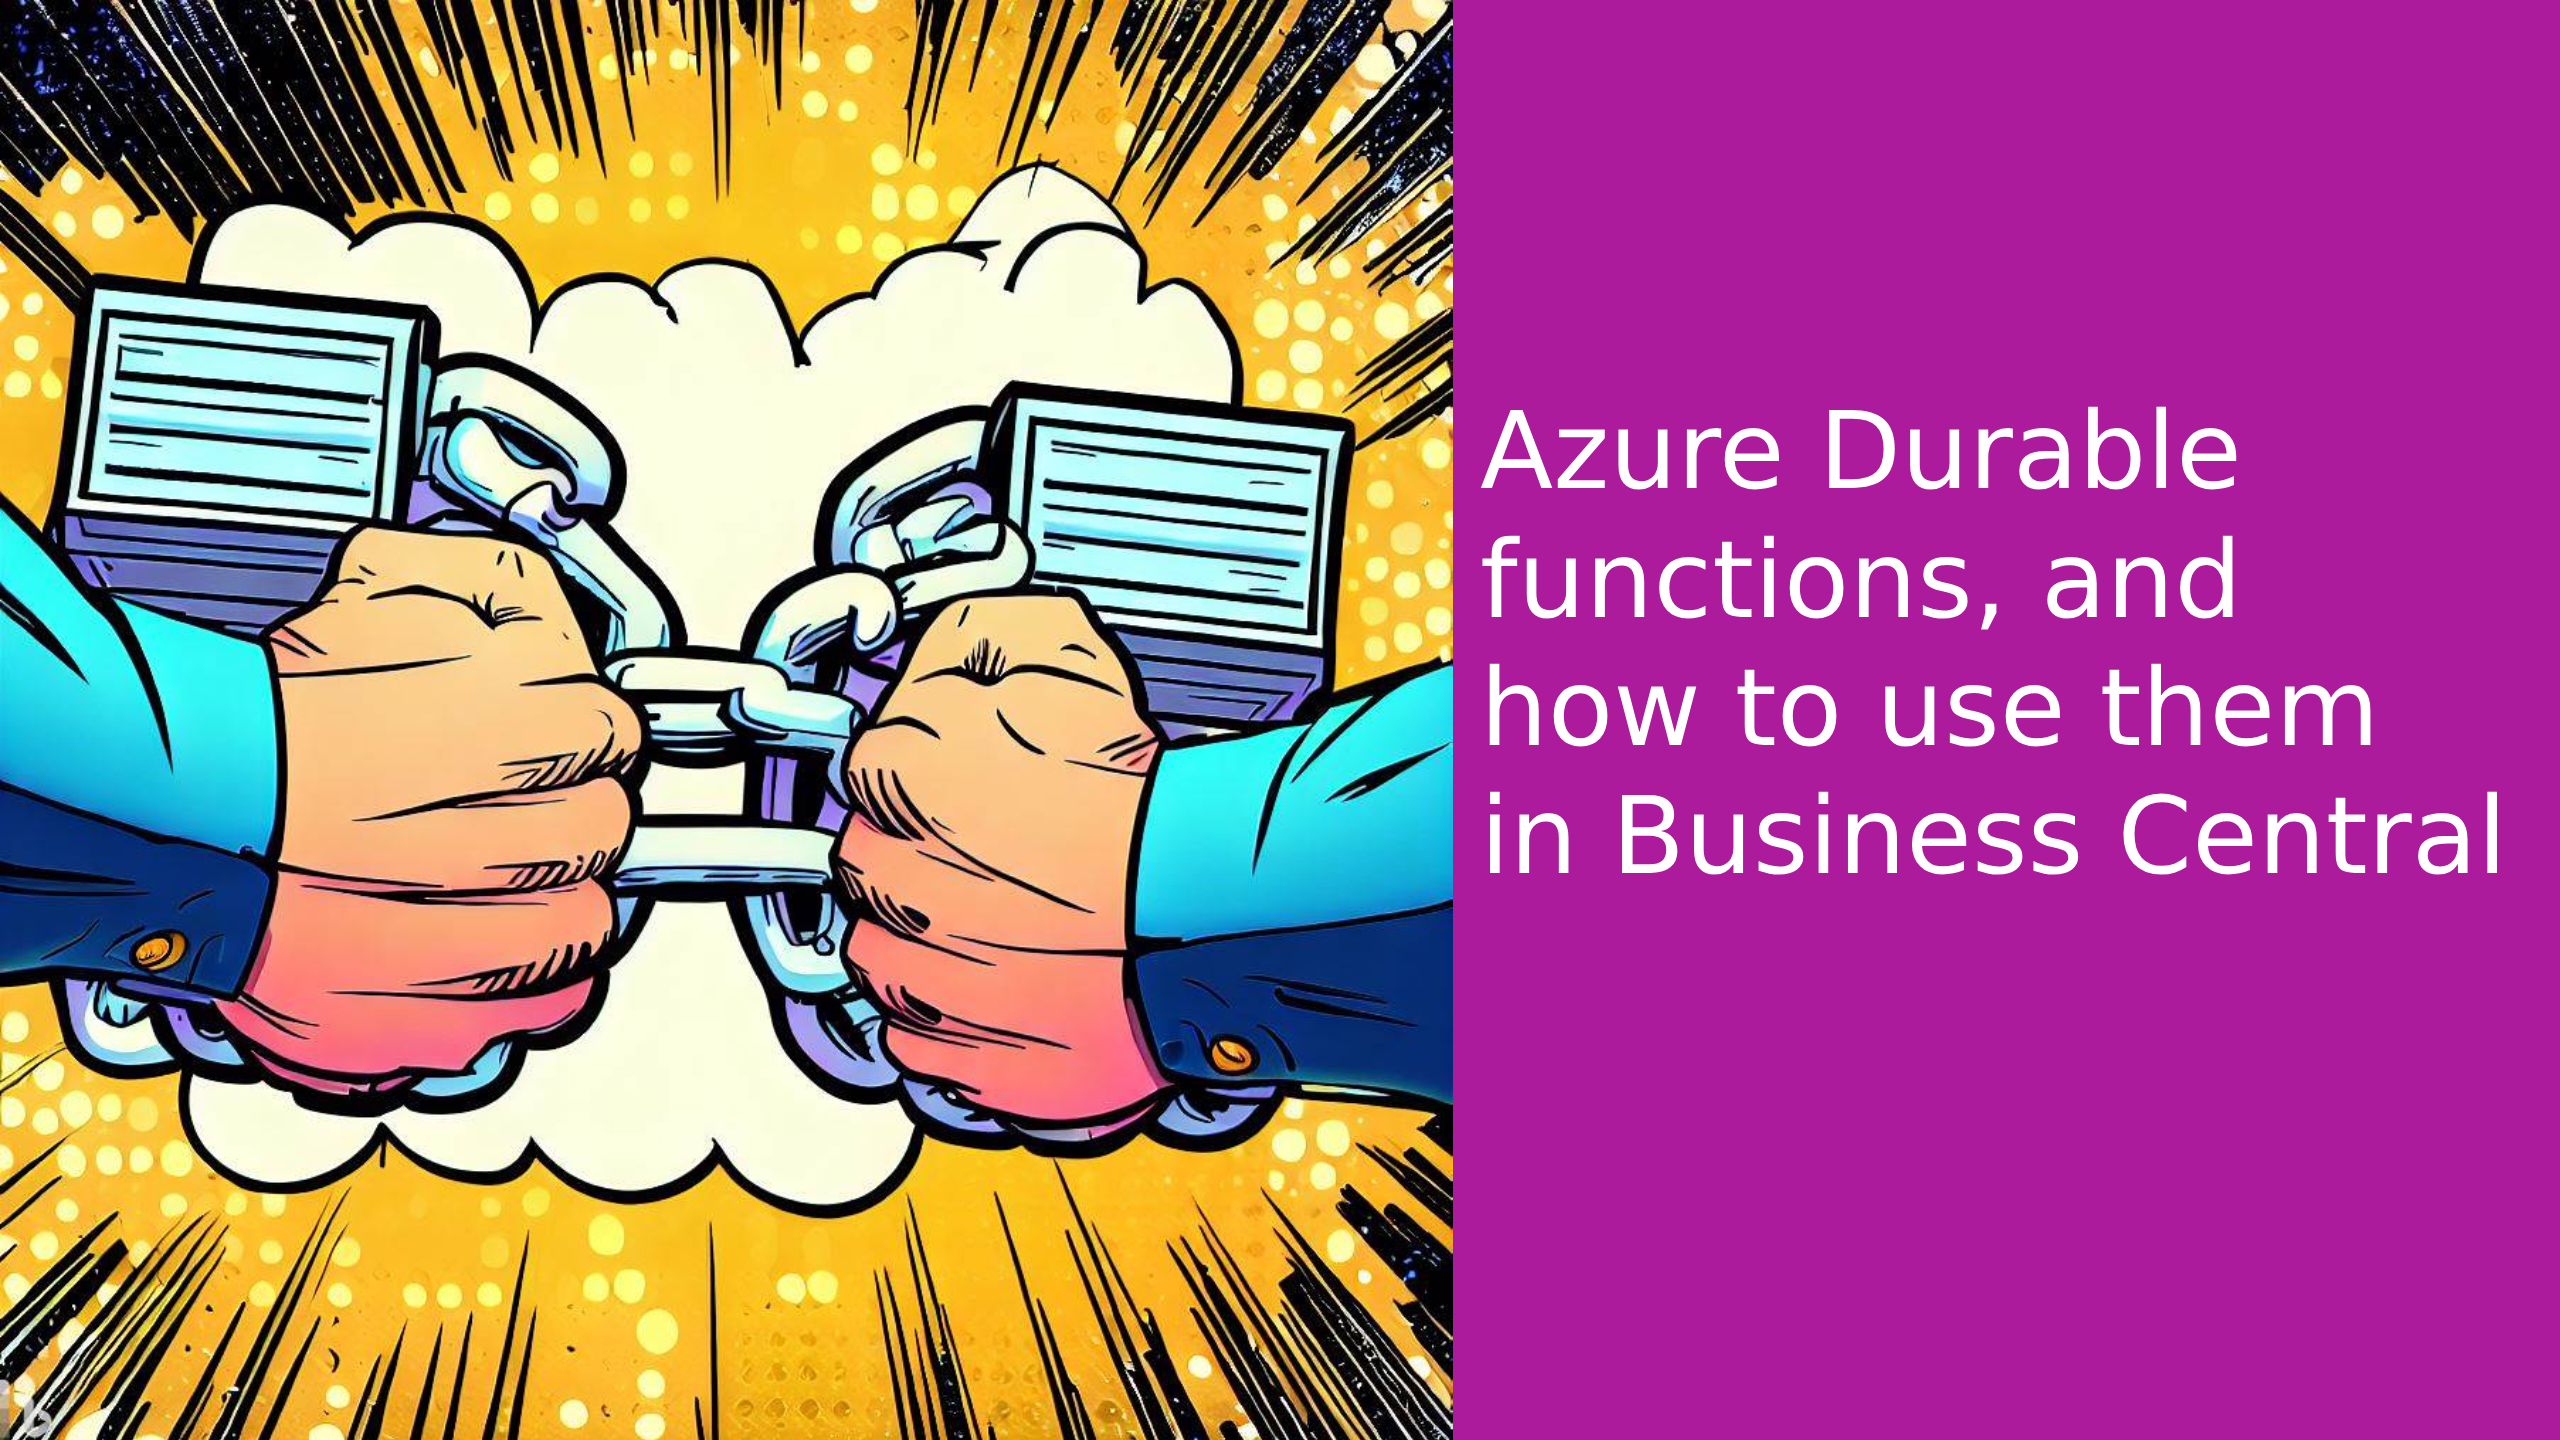 Azure Durable functions, and how to use them in Business Central